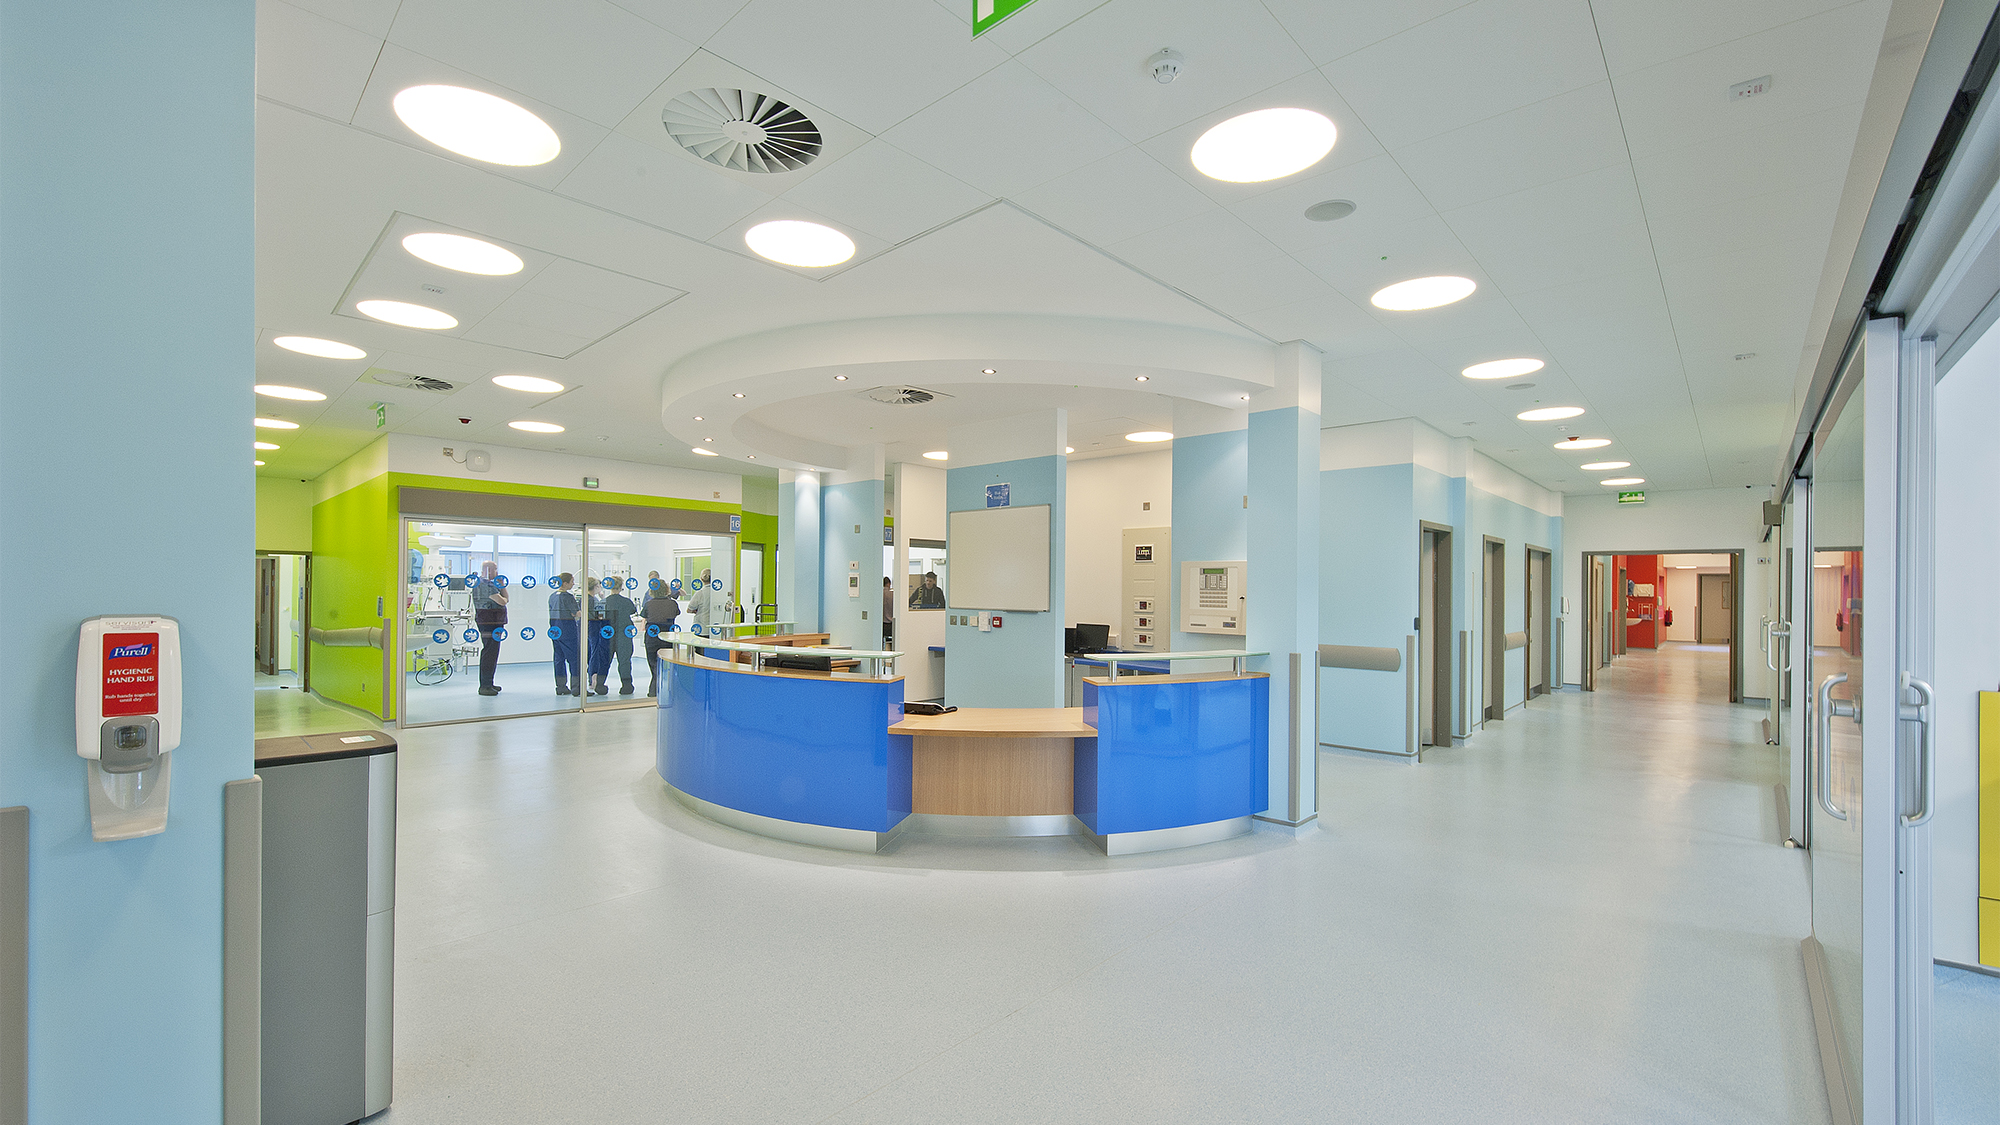 Arup provided mechanical and electrical design services as part of a sisk lead design and build team for the construction of a new Paediatric Intensive Care Unit (PICU) at Our Lady’s Children’s Hospital in Dublin. Photo: John Sisk and Sons 